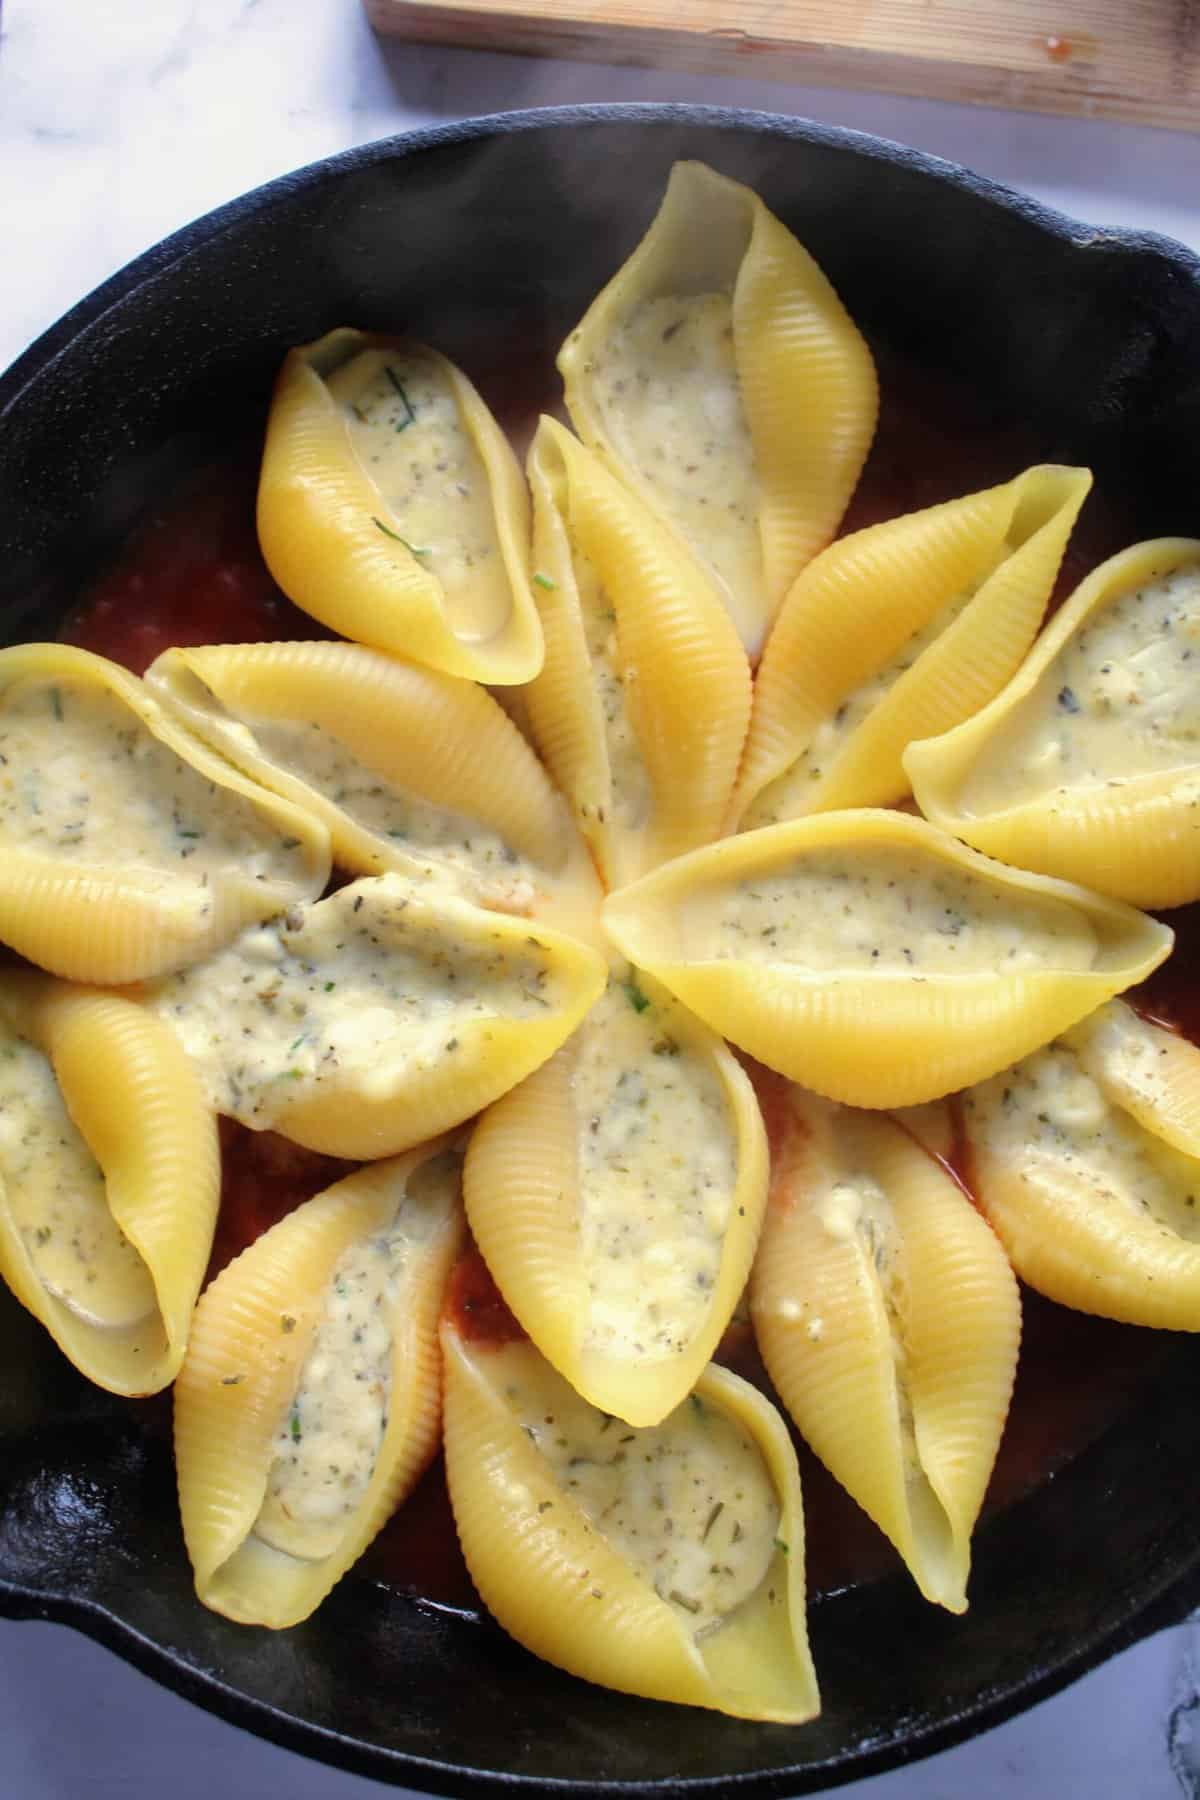 https://drizzlemeskinny.com/wp-content/uploads/2023/03/Stuffed-shells-with-the-cheese-mixture-arranged-over-the-marinara-scaled.jpg